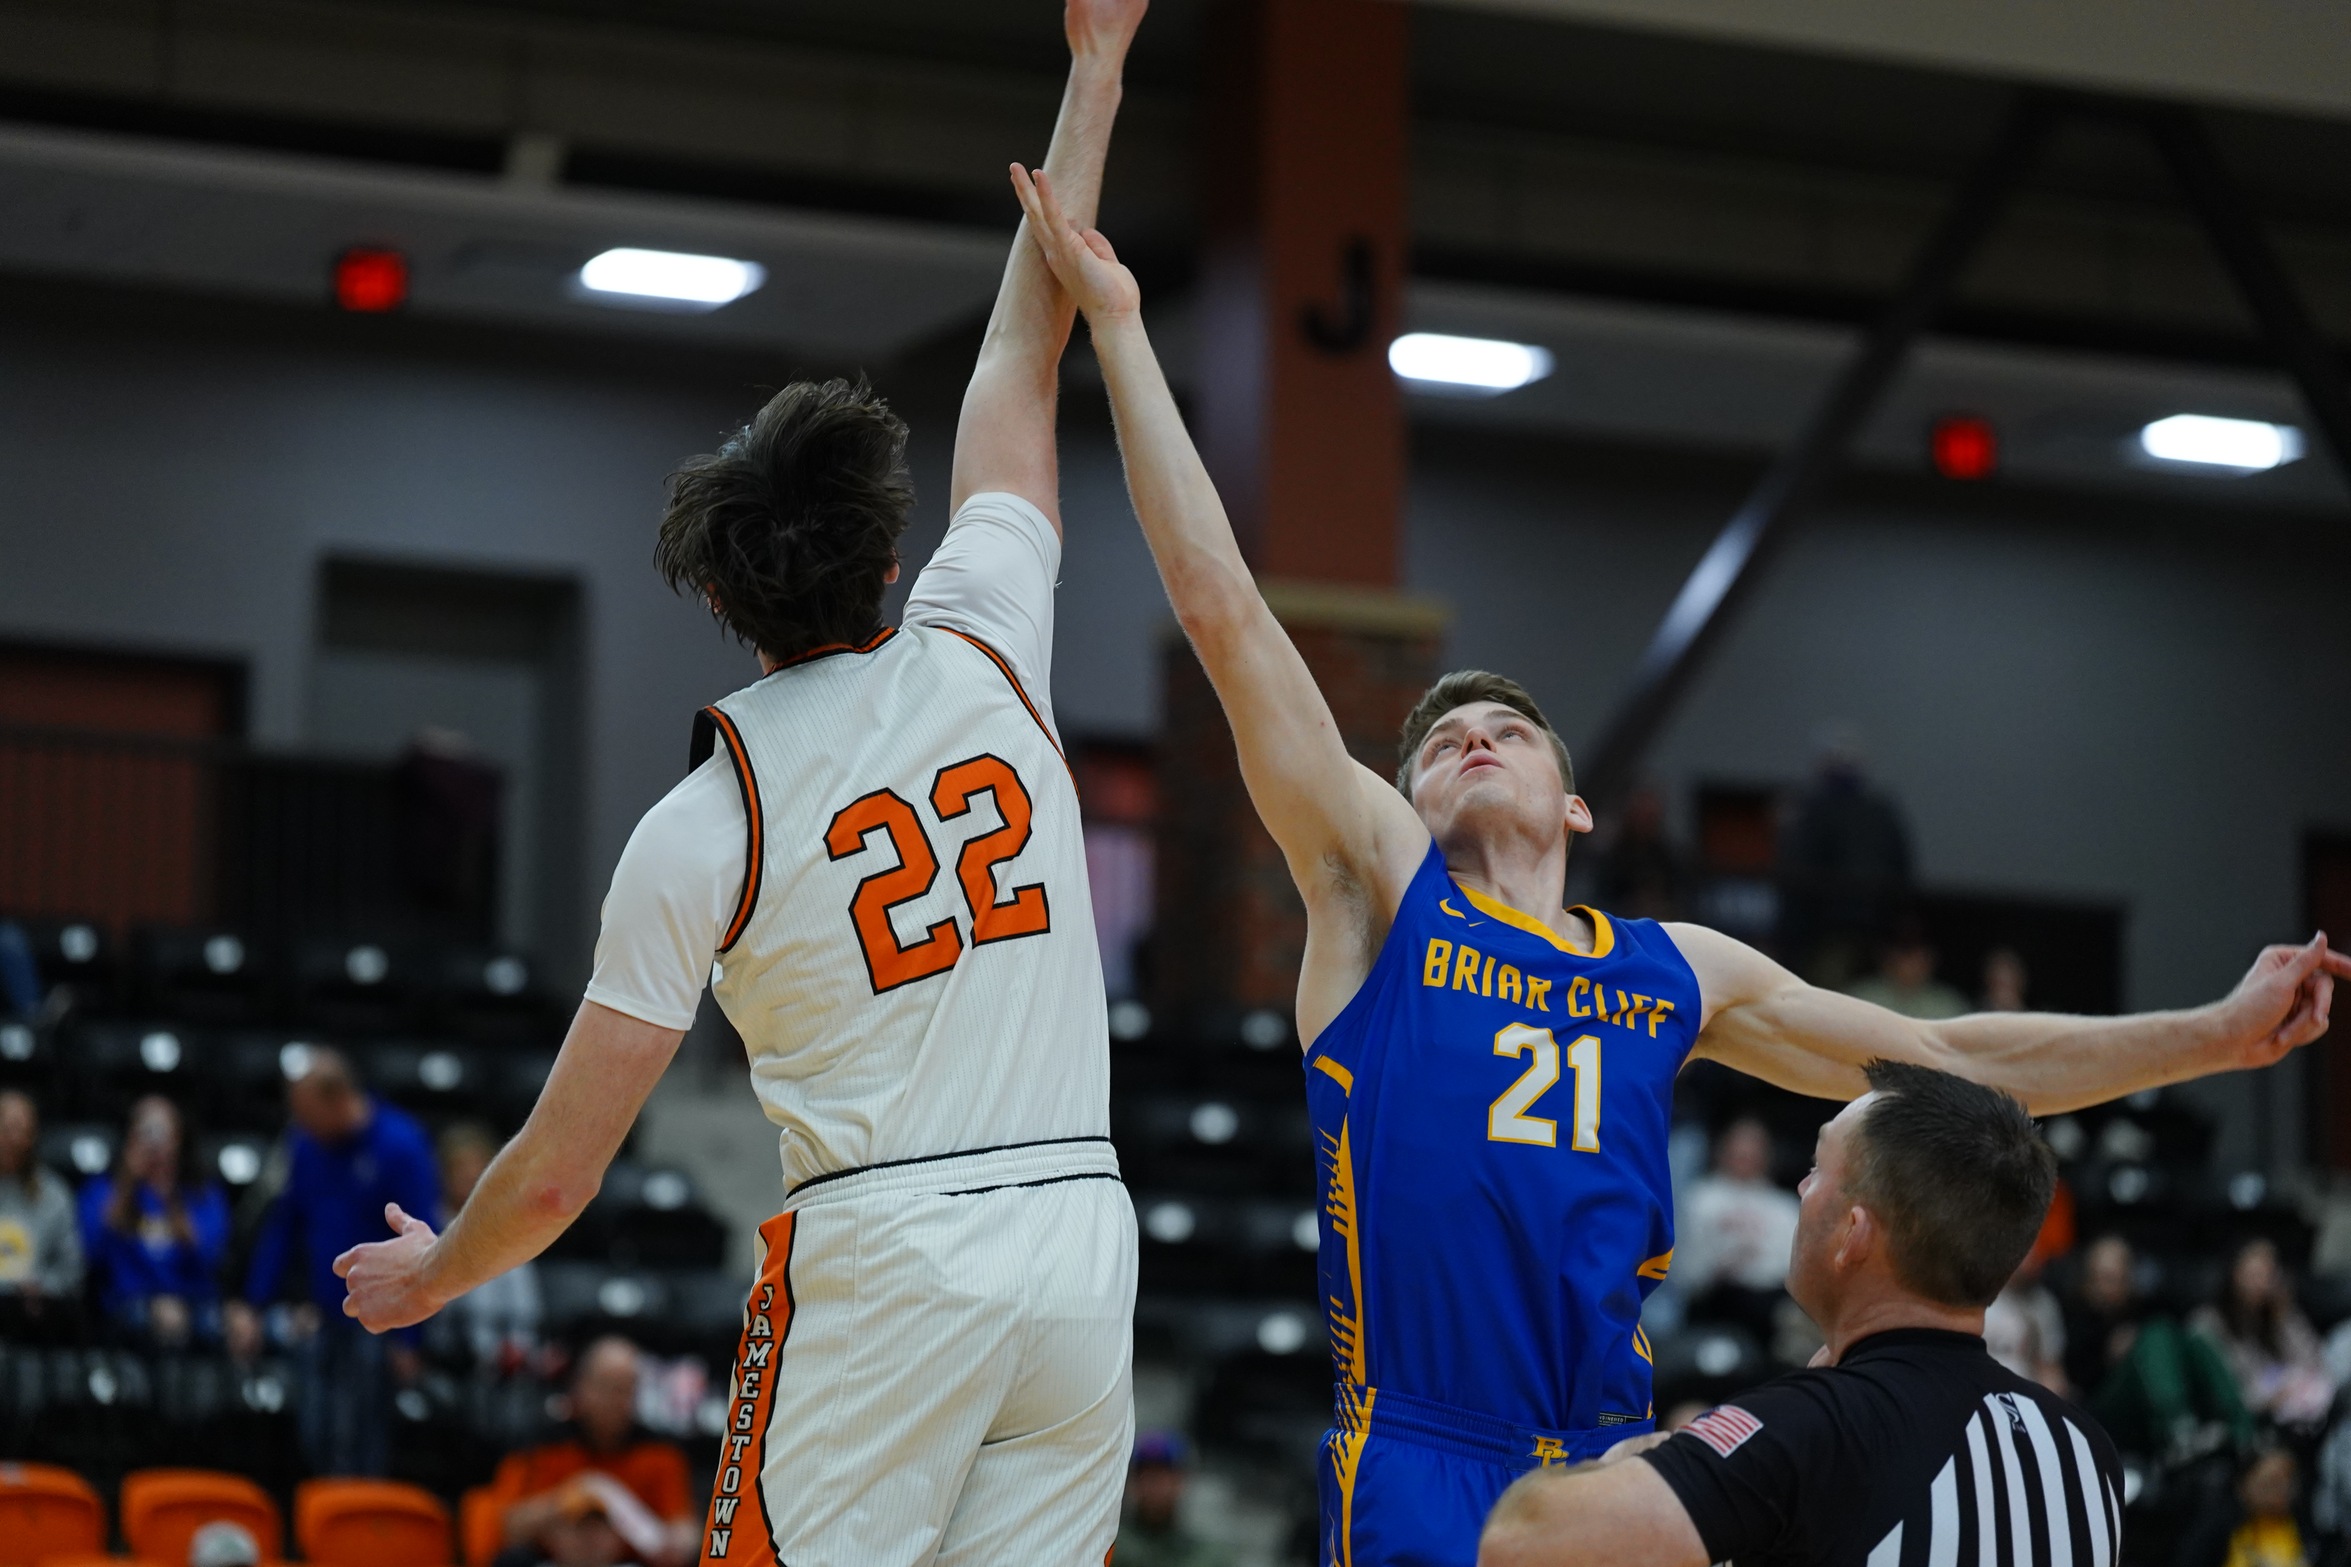 Jimmies beat Chargers and extend win streak to four